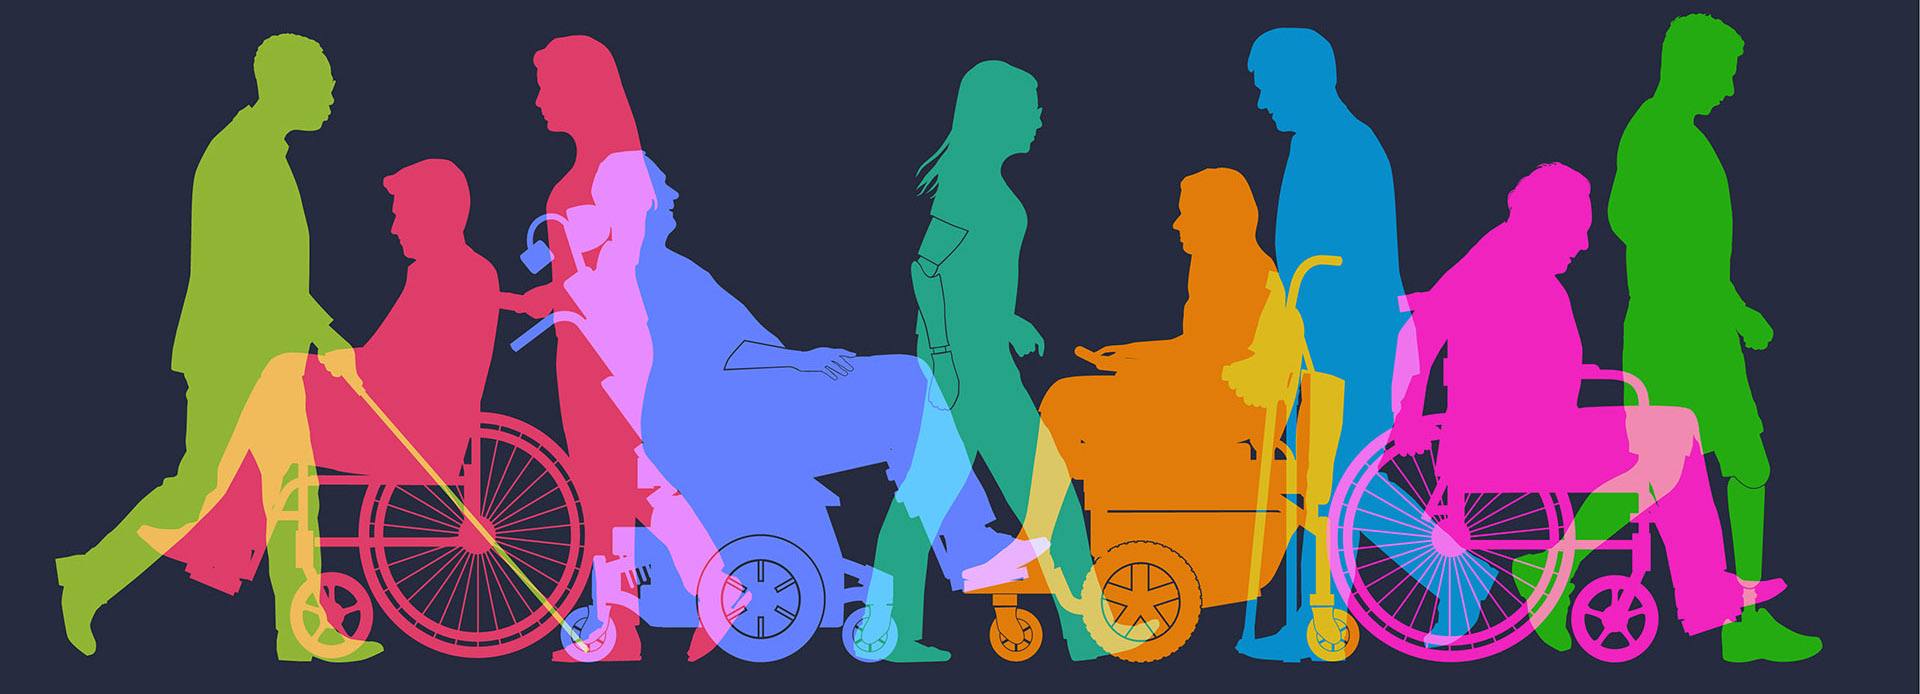 Graphic depicting 9 intermingling figures, in different colours, each associated with different disabilities. A light green figure of a blind person with a cane, a pink man in a wheelchair being led by a woman, a blue elderly person in an autonomous chair, a celadon woman with a prosthetic arm, an orange person in an automatic wheelchair, a blue man with crutches, a purple man in an autonomous wheelchair, and a green man with a prosthetic leg.